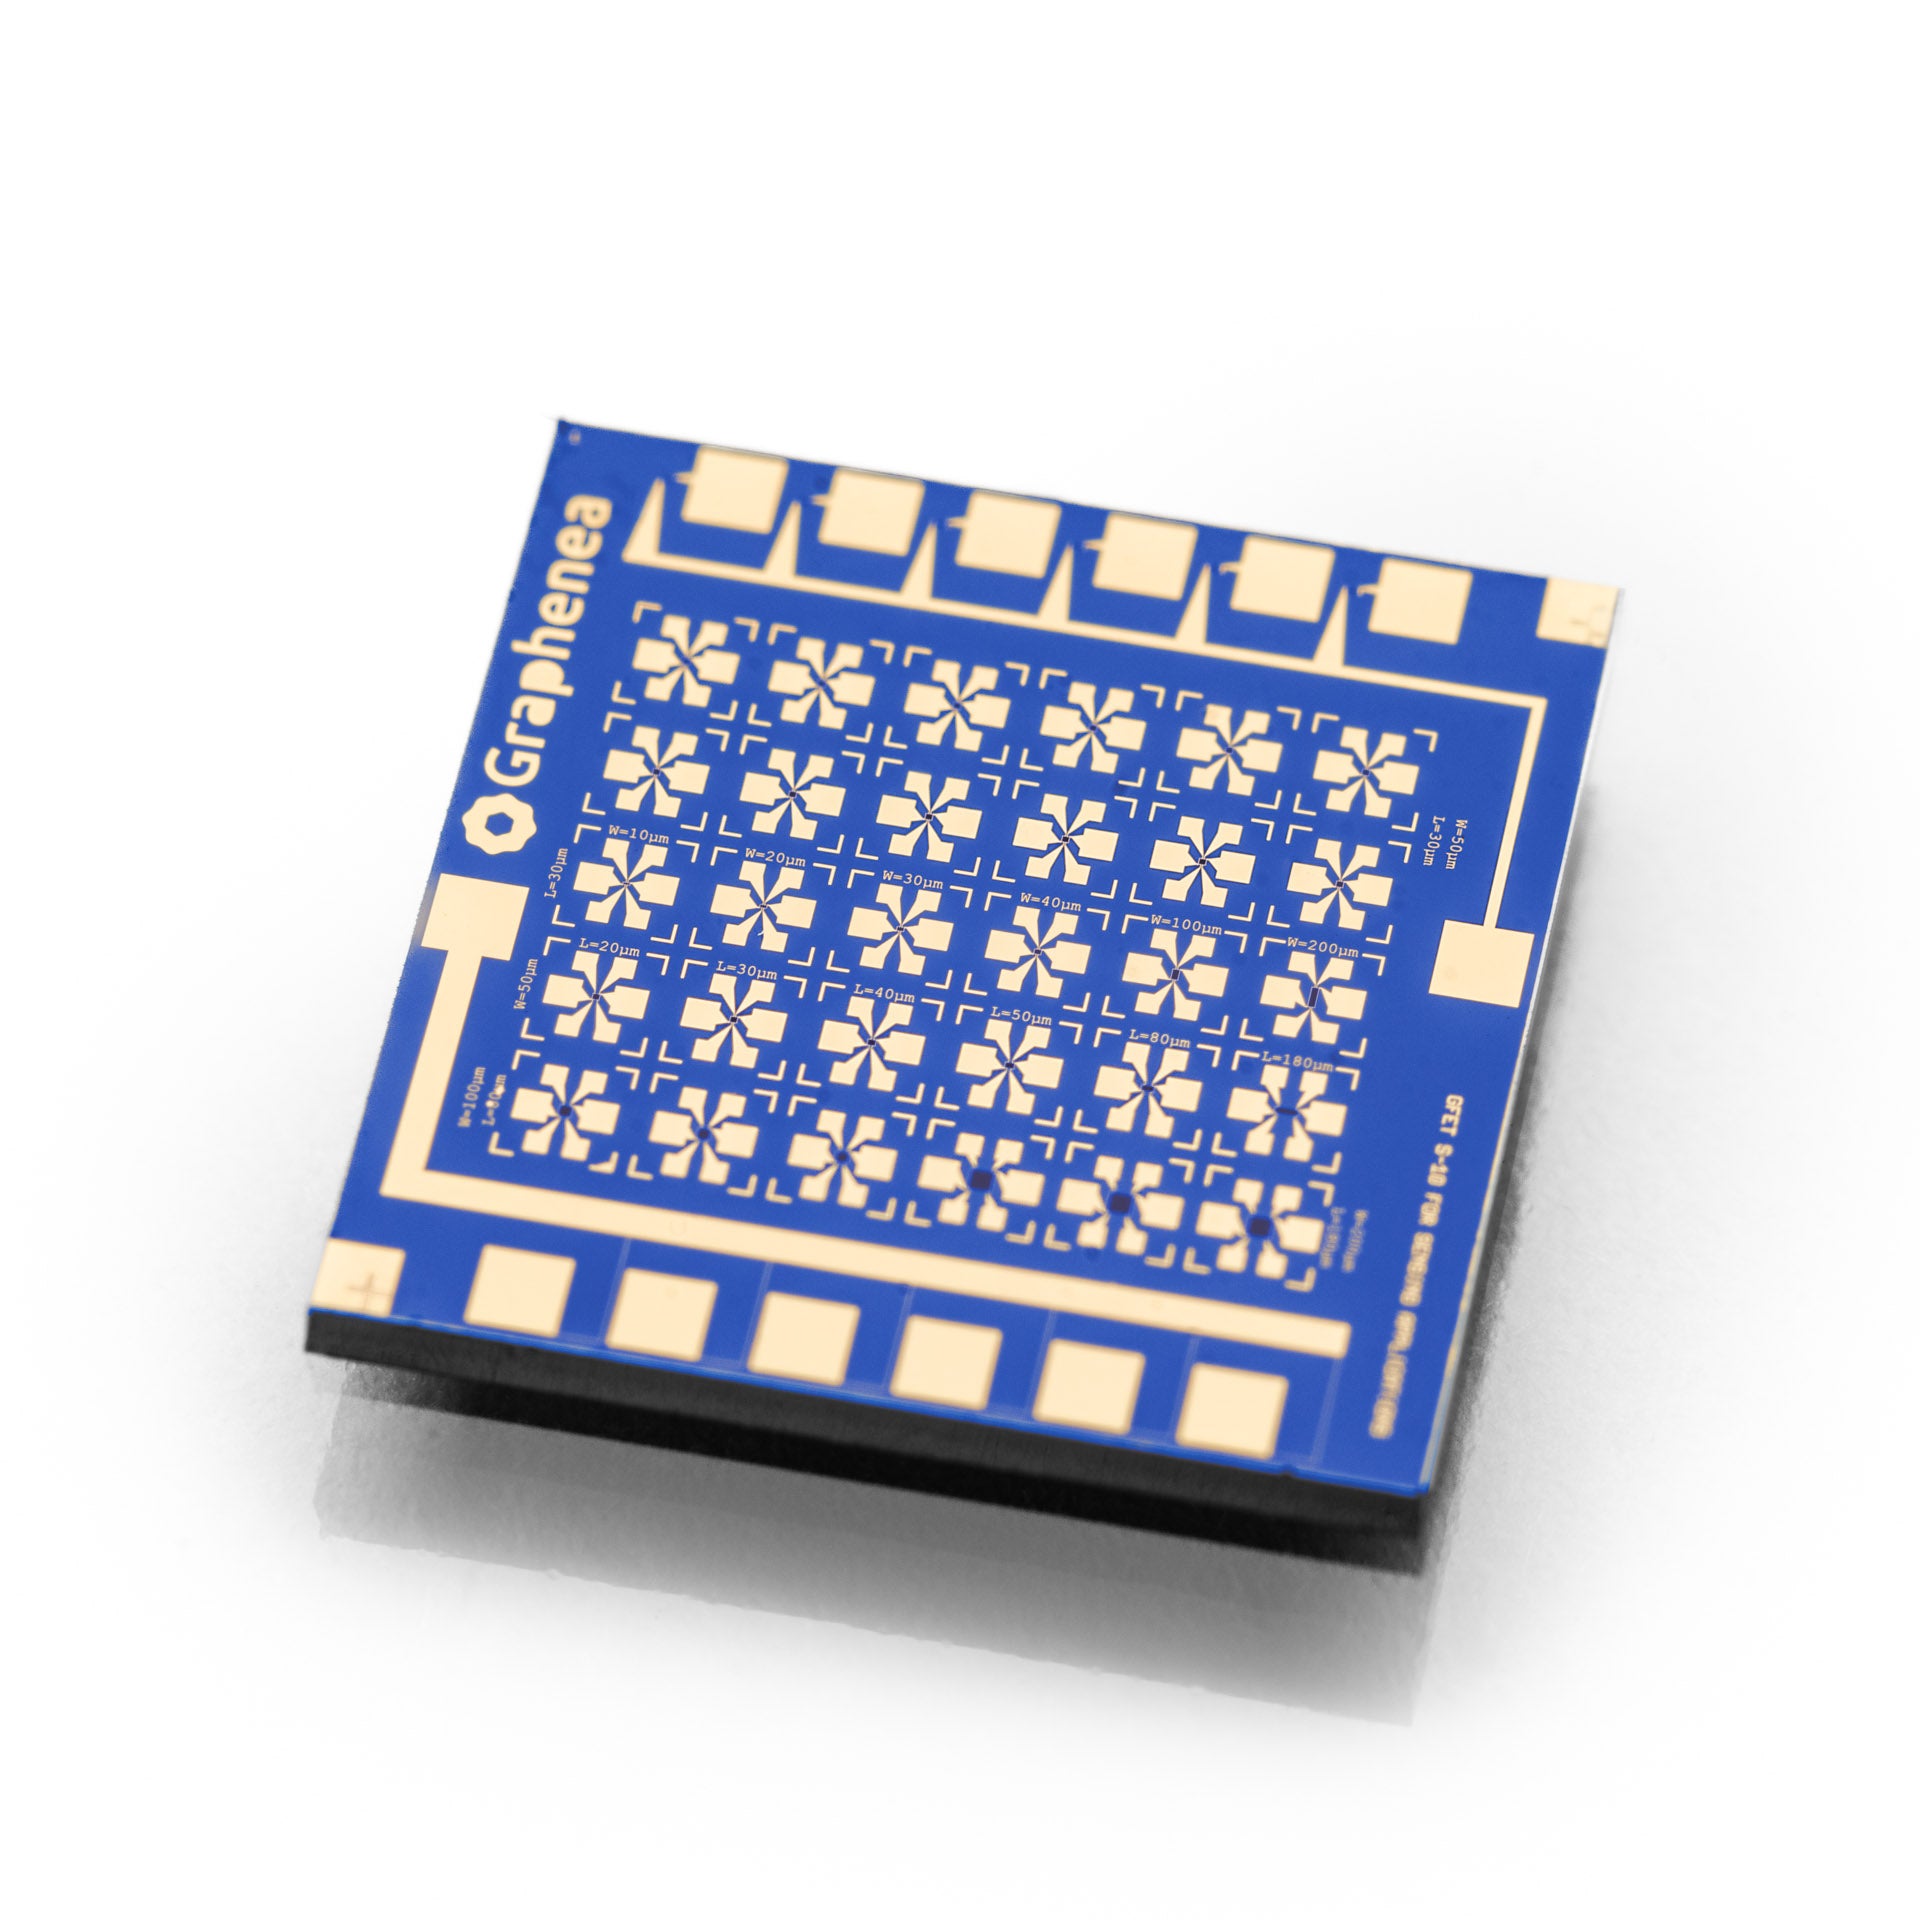 GFET-S10 for Sensing applications